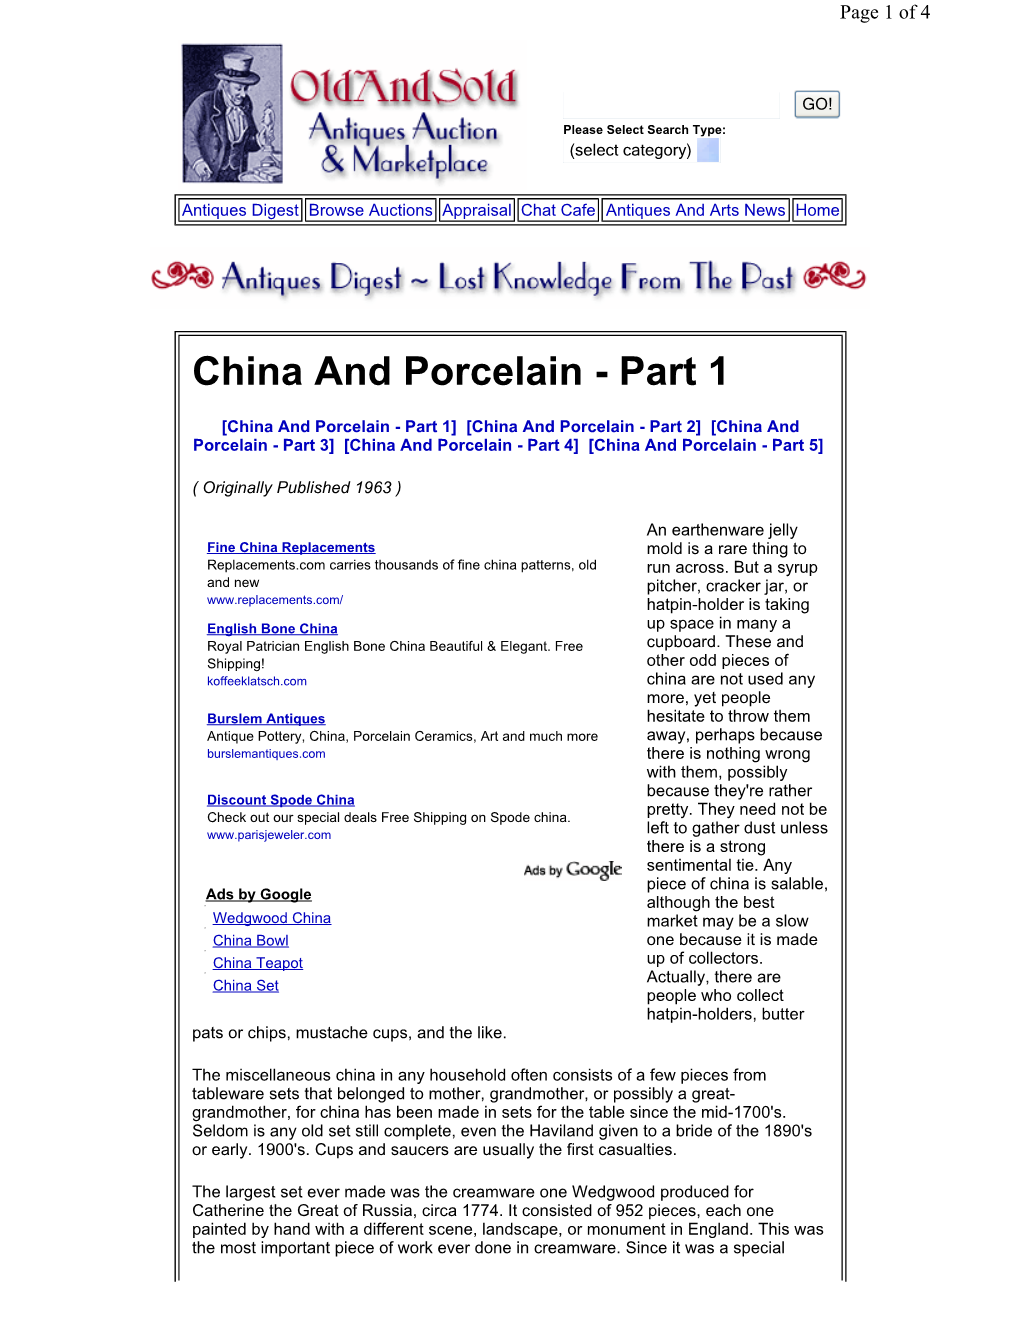 China and Porcelain - Part 1